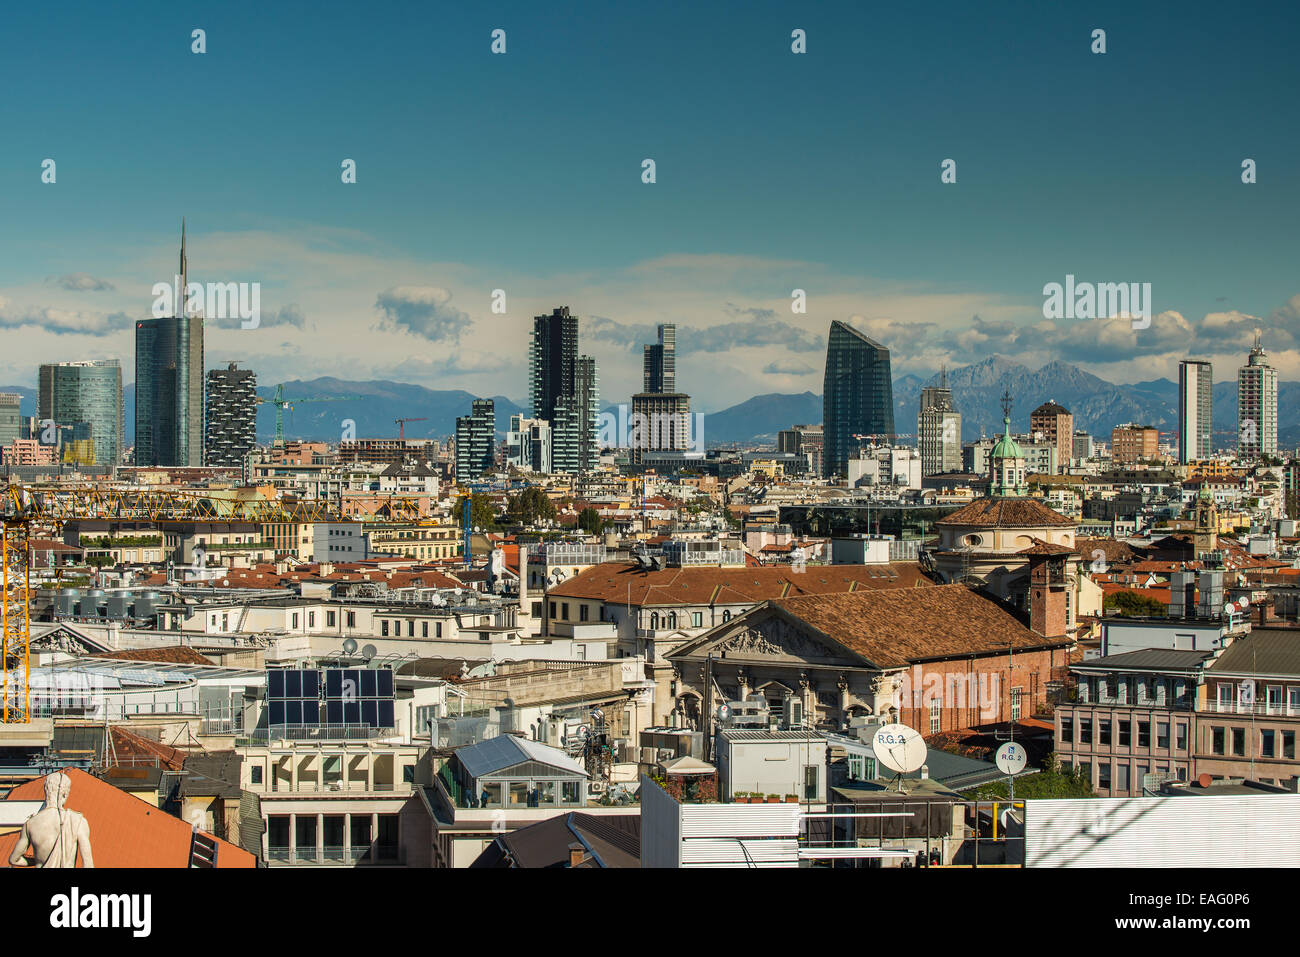 City skyline with the Alps in the background, Milan, Lombardy, Italy Stock Photo